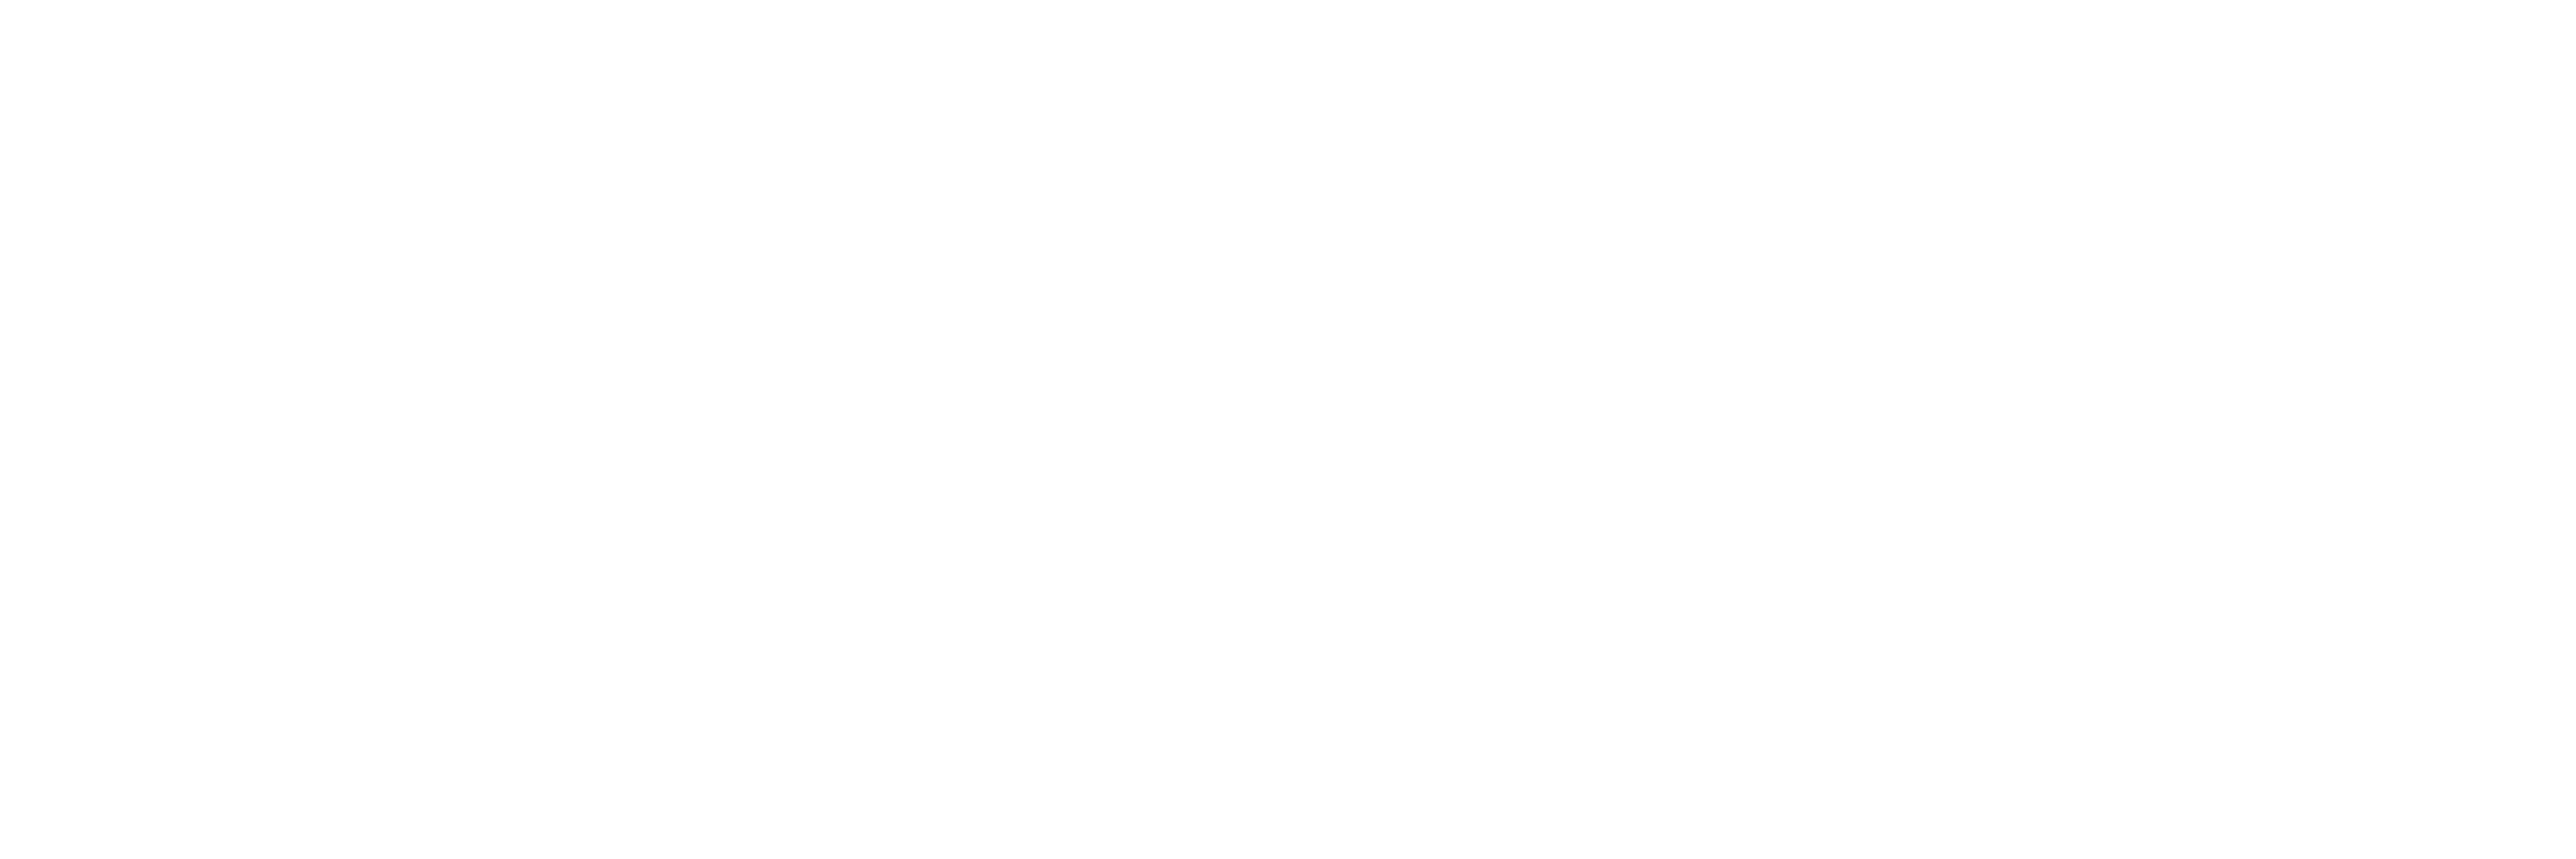 Coronic Software & Security